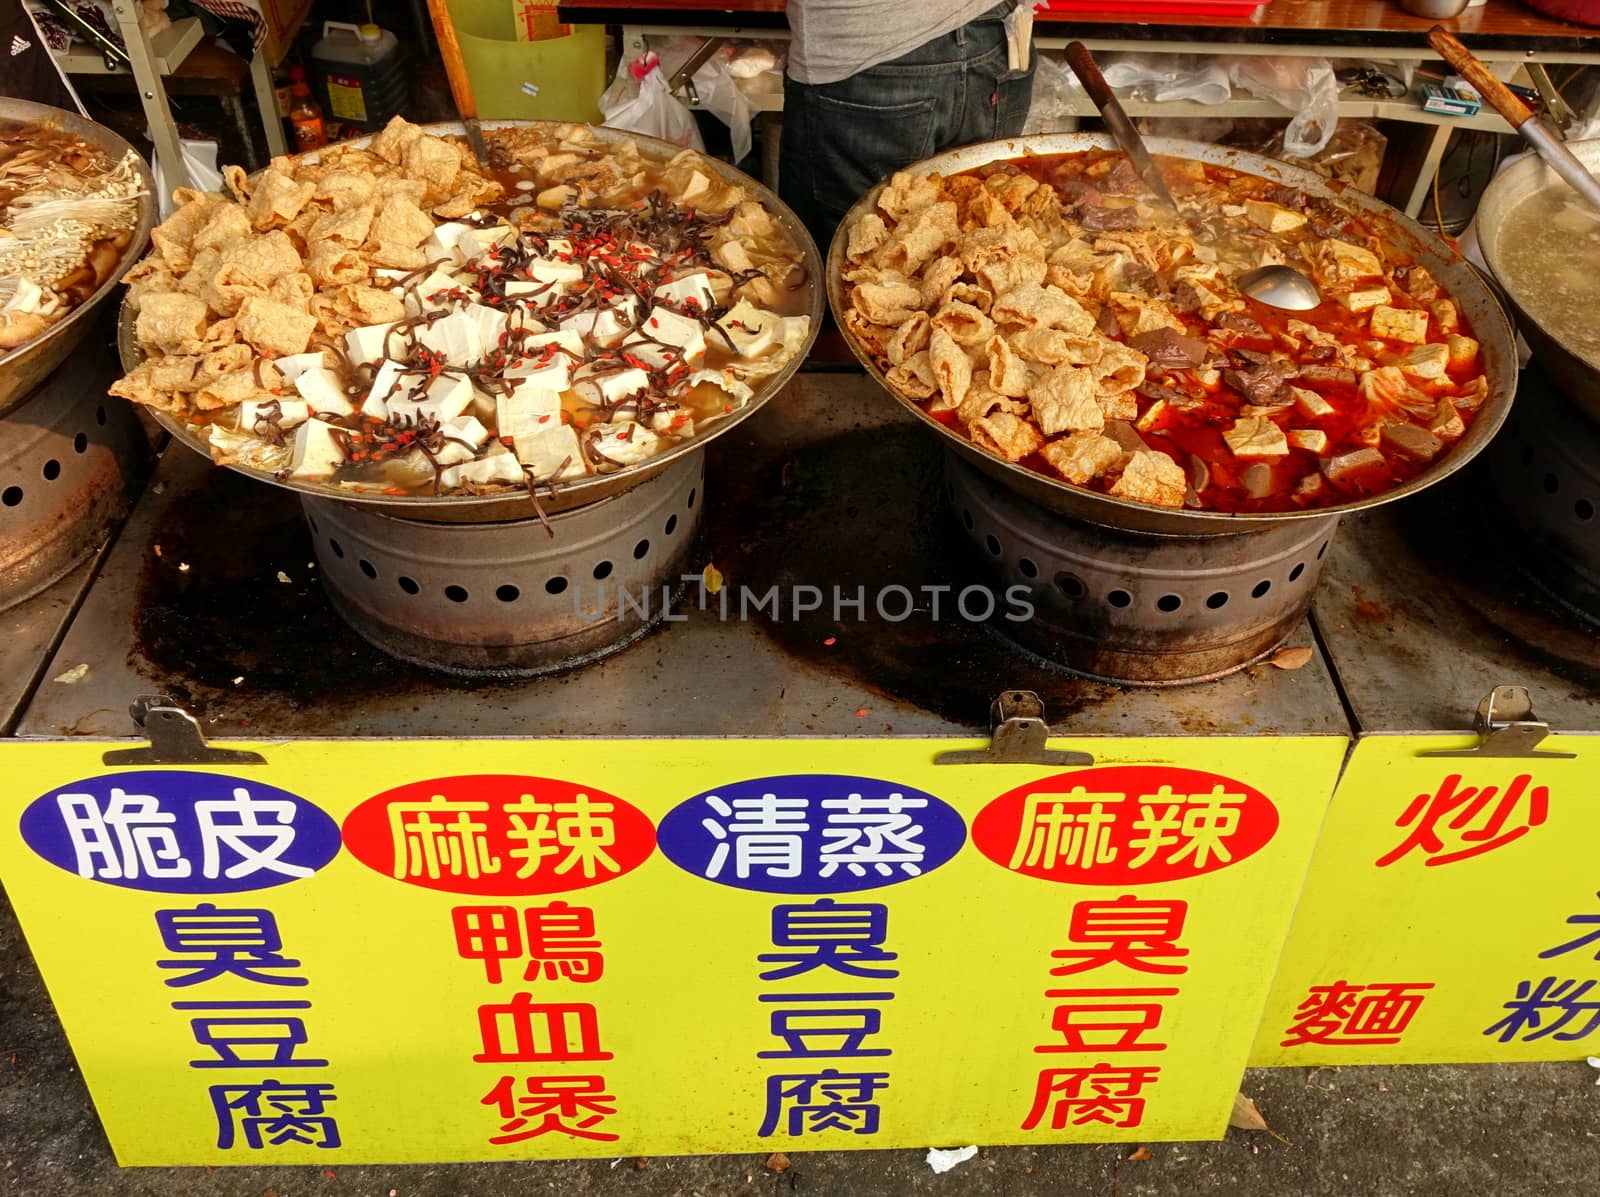 KAOHSIUNG, TAIWAN -- OCTOBER 15, 2016: An outdoor food stall advertises hot pot cooked with tofu, duck blood cakes, chili and Chinese medicinal herbs.